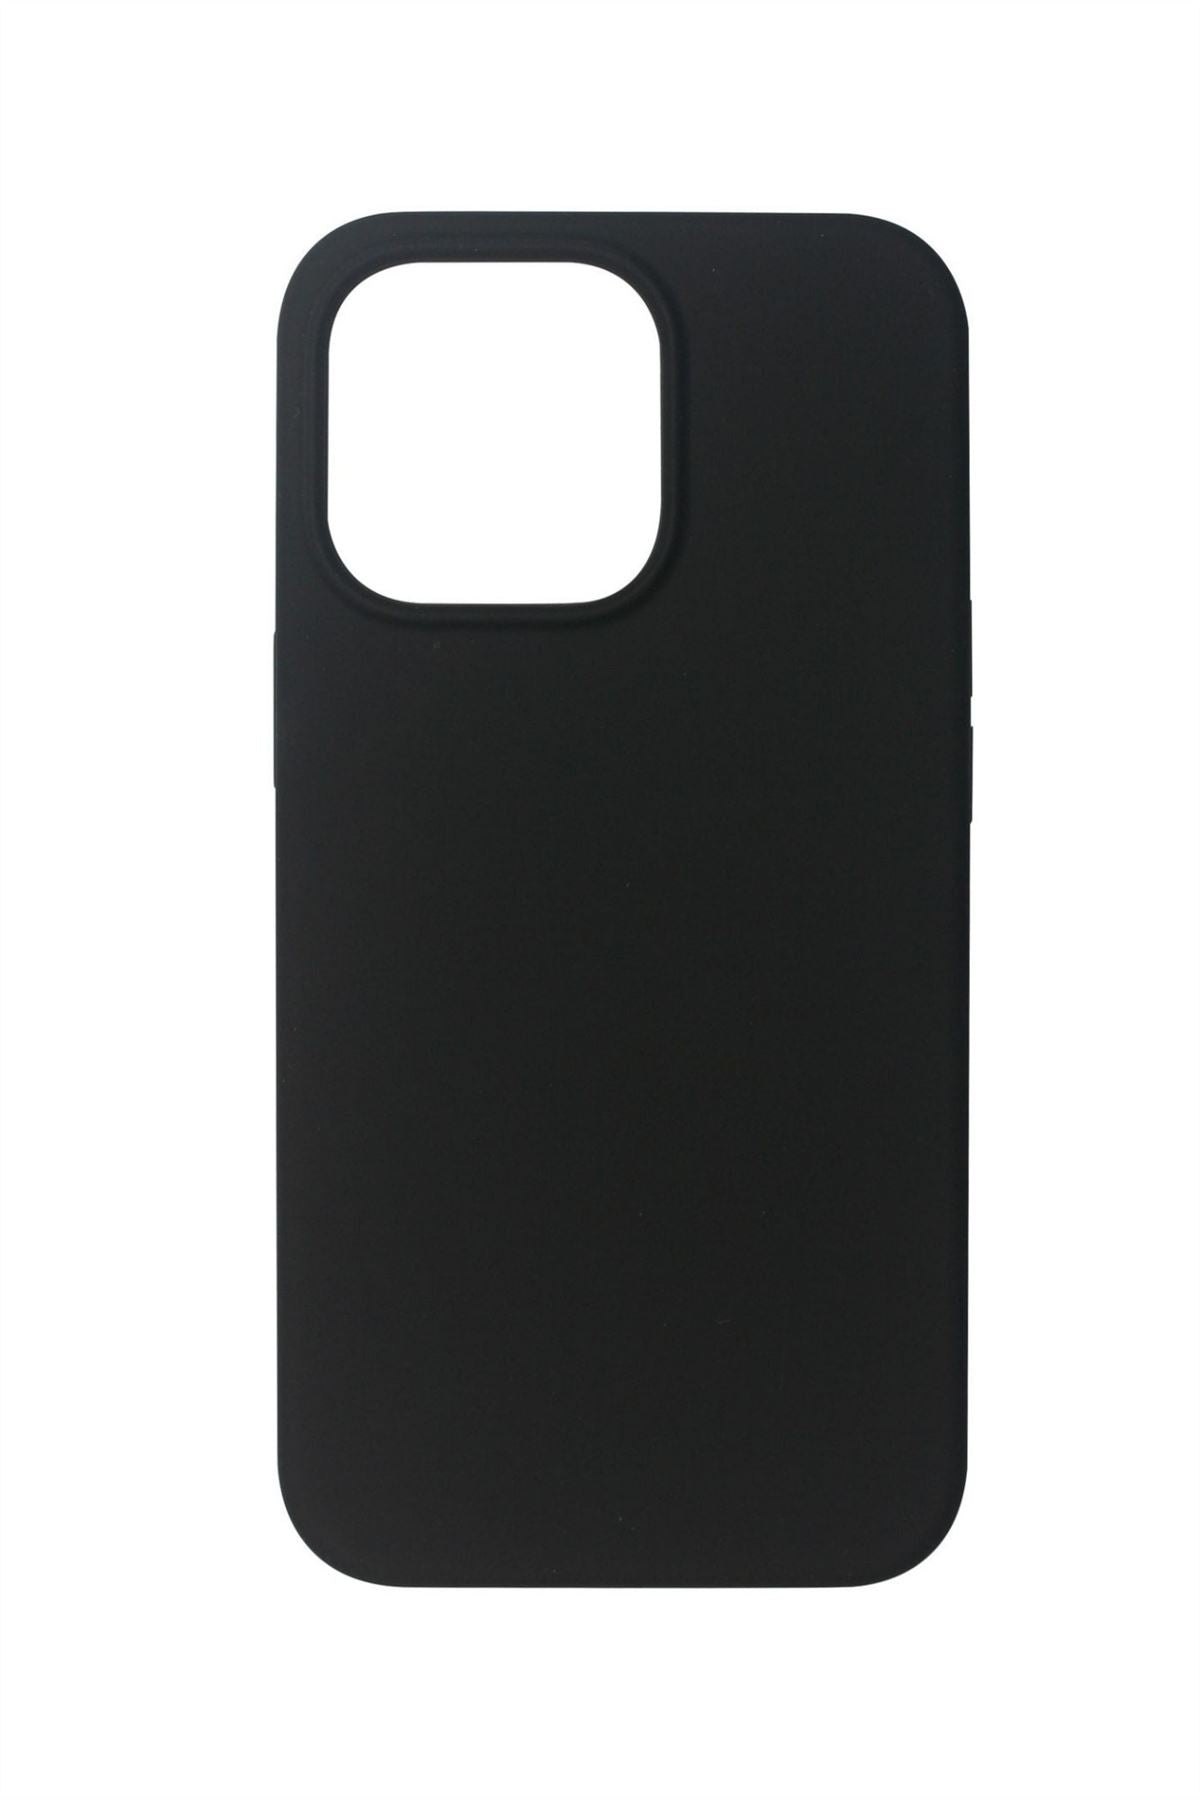 eSTUFF Magnetic Silicone Cove for iPhone 13 Pro Max mobile phone case 17 cm (6.7&quot;) Cover Black